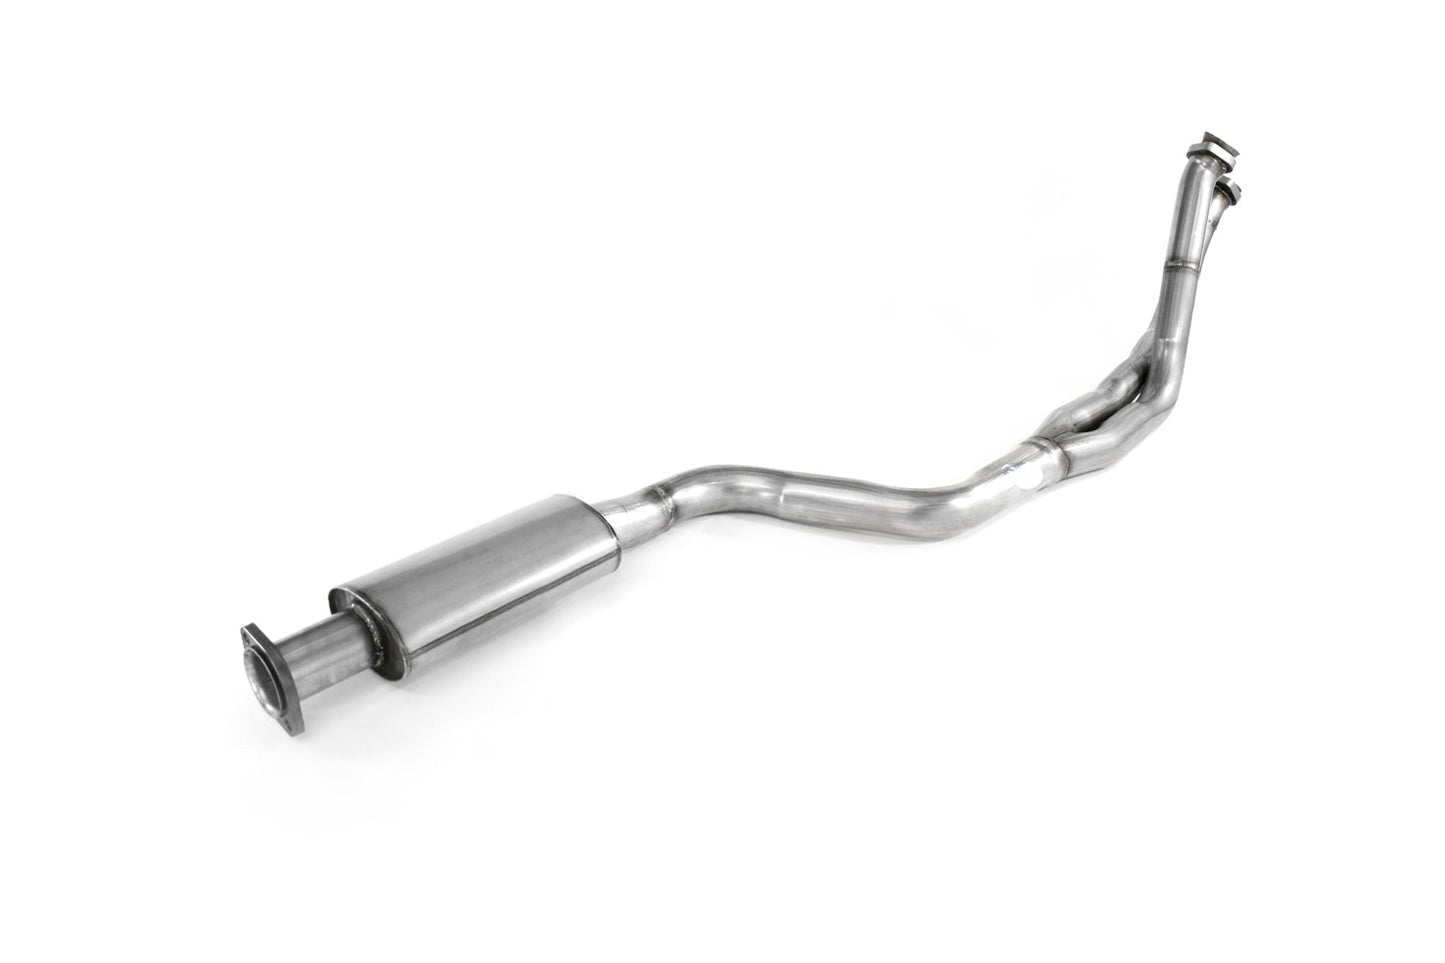 Mercedes 190 E 2.3 16V W201 - Stainless Steel Exhaust (1984-88) - QuickSilver Exhausts